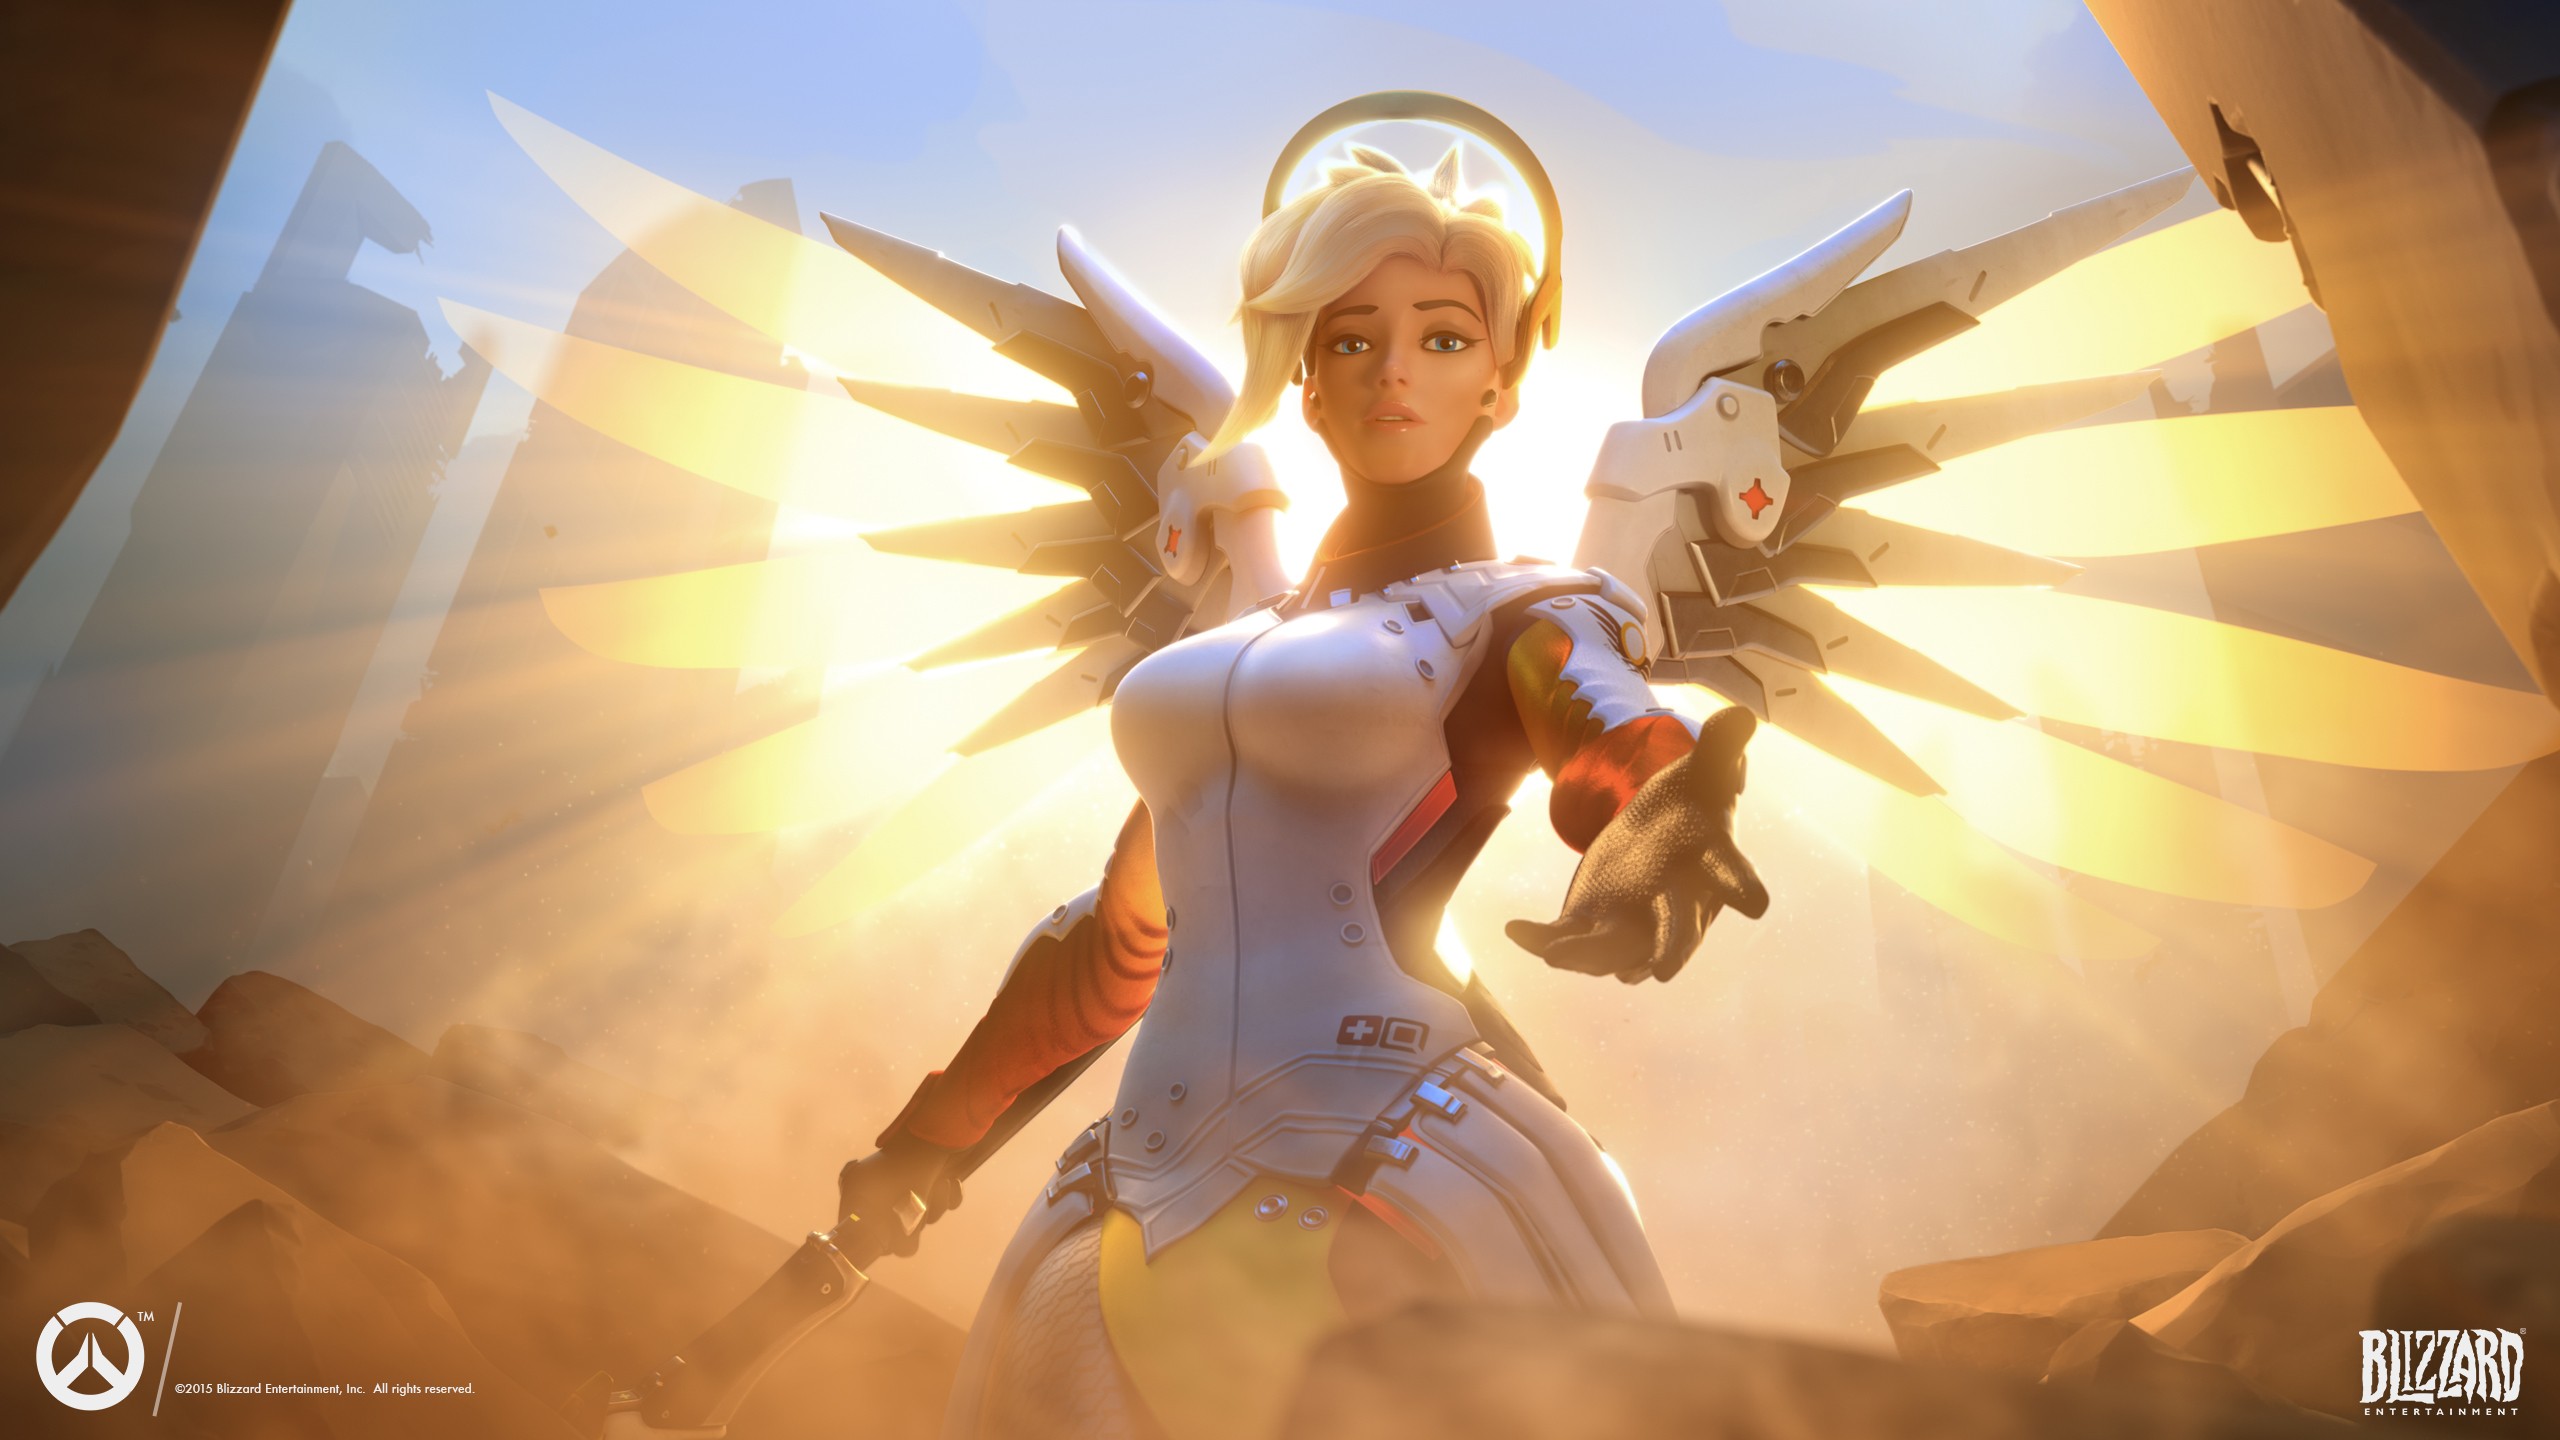 General 2560x1440 Overwatch angel wings Blizzard Entertainment Mercy (Overwatch) video games fictional video game characters PC gaming video game art video game girls 2015 (Year)